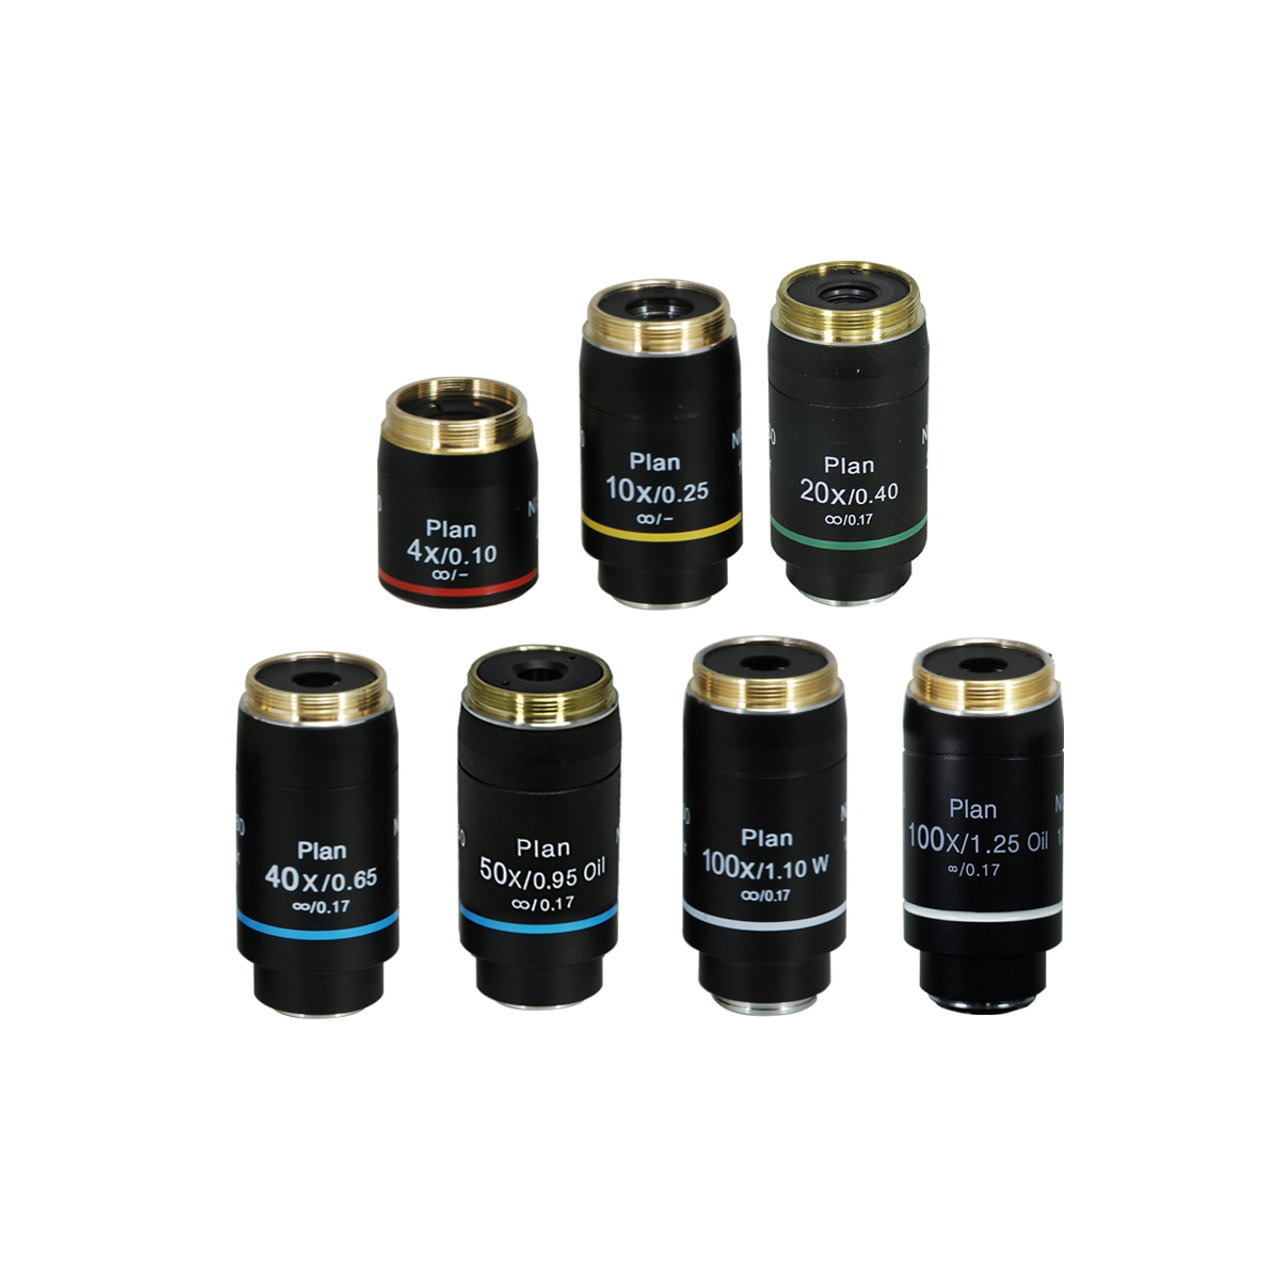 Infinity-Corrected Plan Achromatic Microscope Objective Lens Set (Oil  Spring) 4X 10X 20X 40X 100X with Black Finish